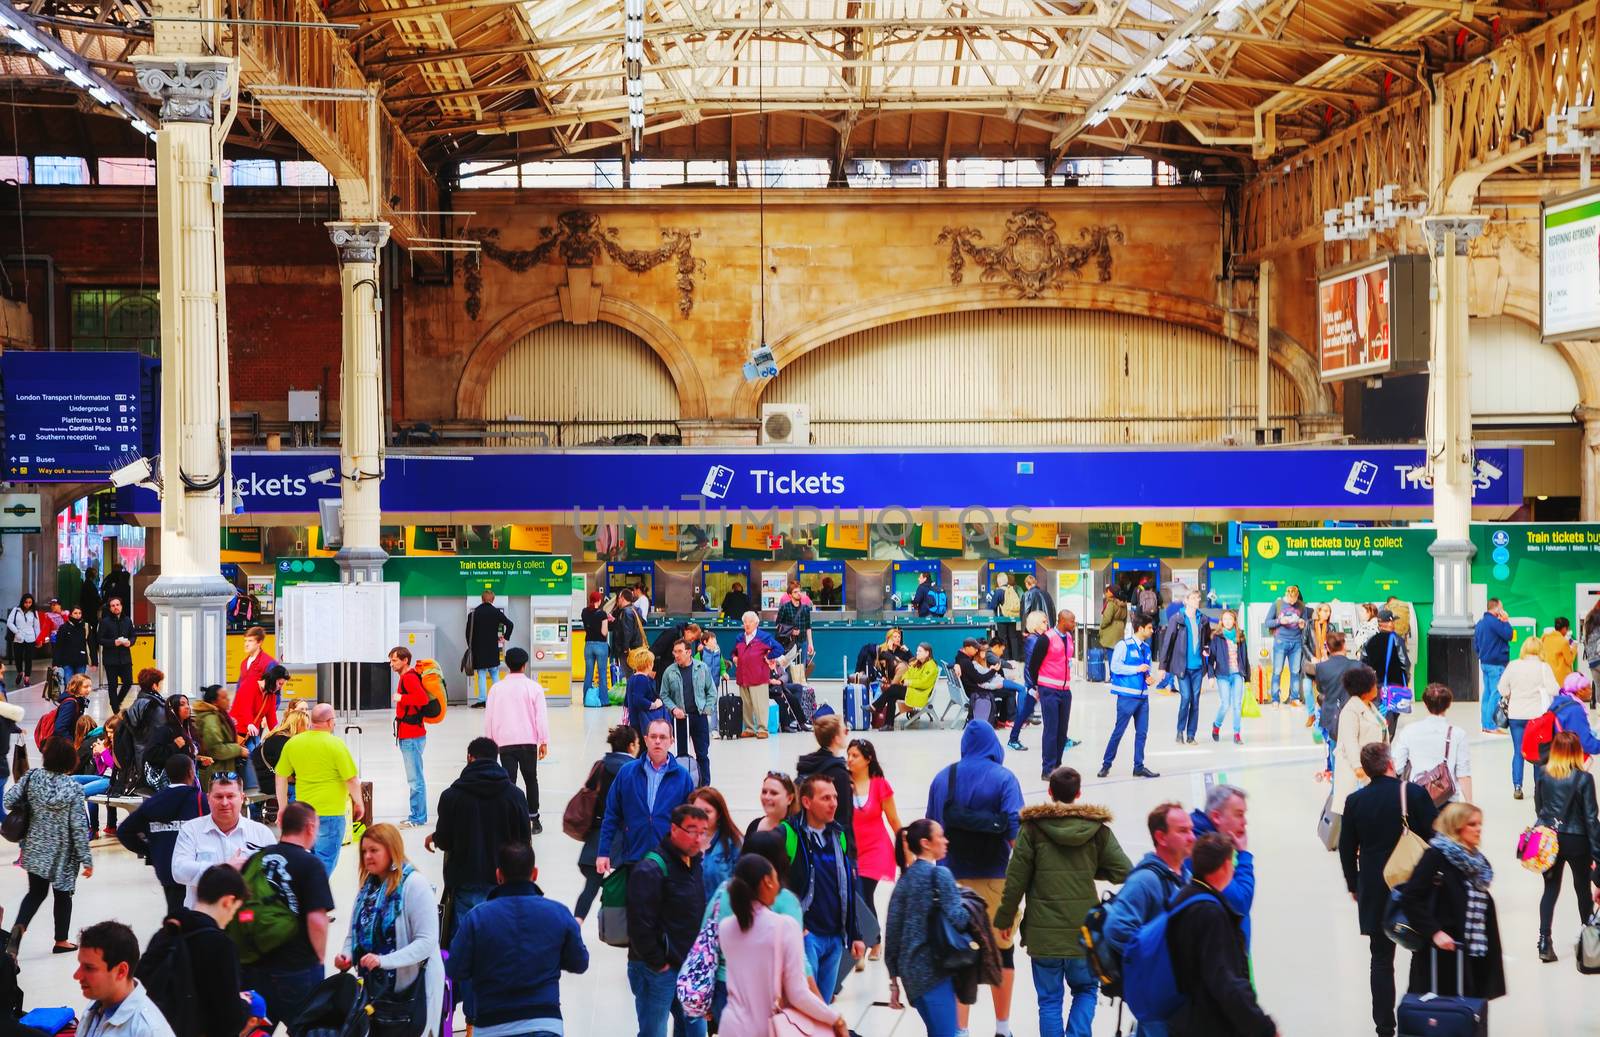 LONDON - APRIL 12: People at the Victoria station on April 12, 2015 in London, UK. Station, generally known as Victoria, is a central London railway terminus and London Underground complex named after Victoria Street.